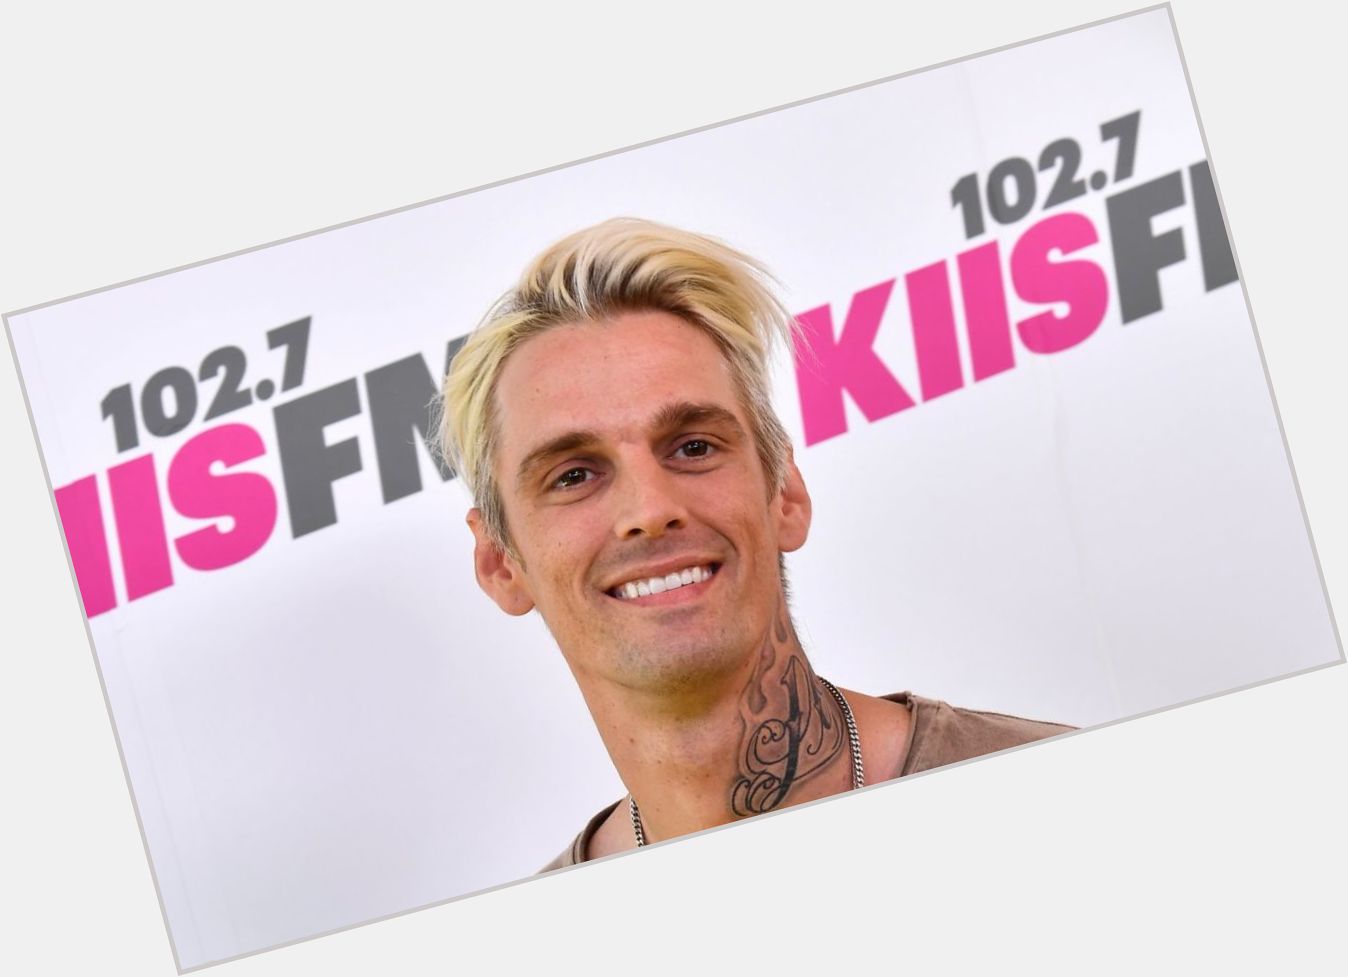 On This Day in 1987 - Aaron Carter was born.  Happy Birthday Aaron.     